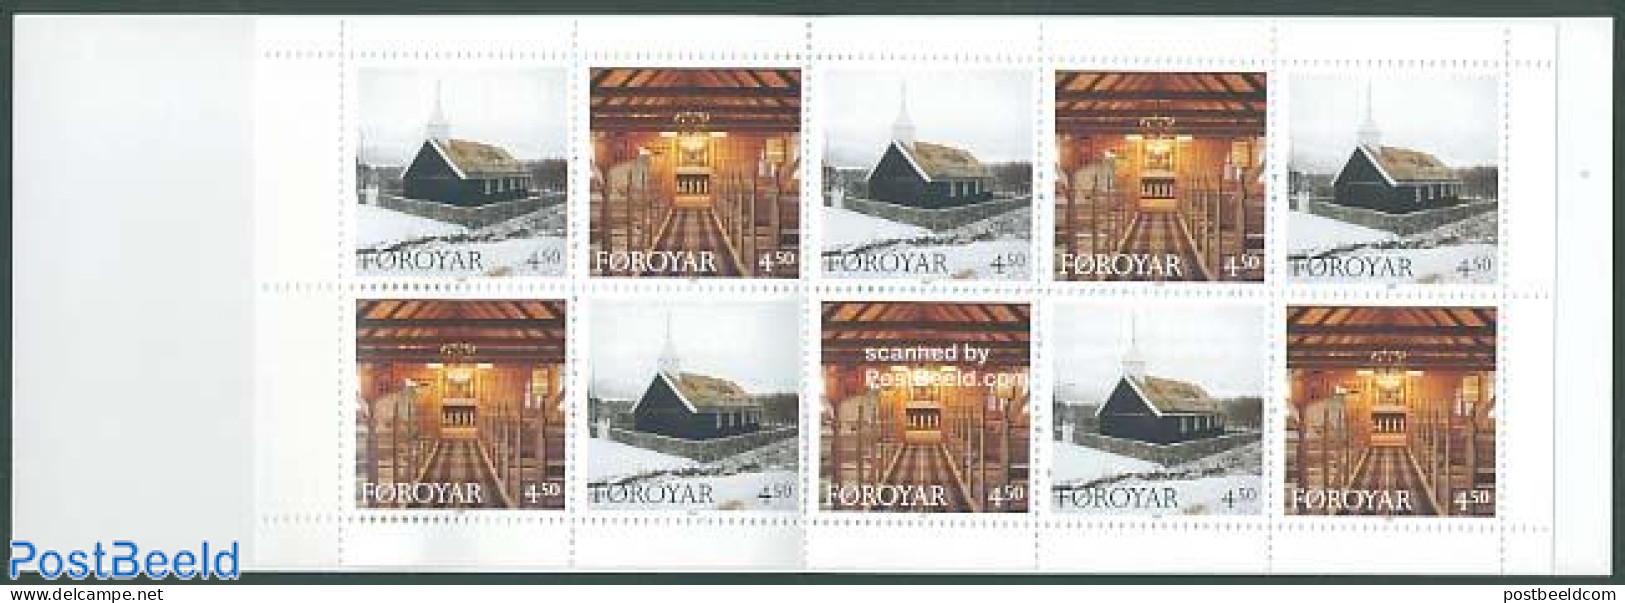 Faroe Islands 1997 Havalik Church Booklet, Mint NH, Religion - Christmas - Churches, Temples, Mosques, Synagogues - St.. - Noël